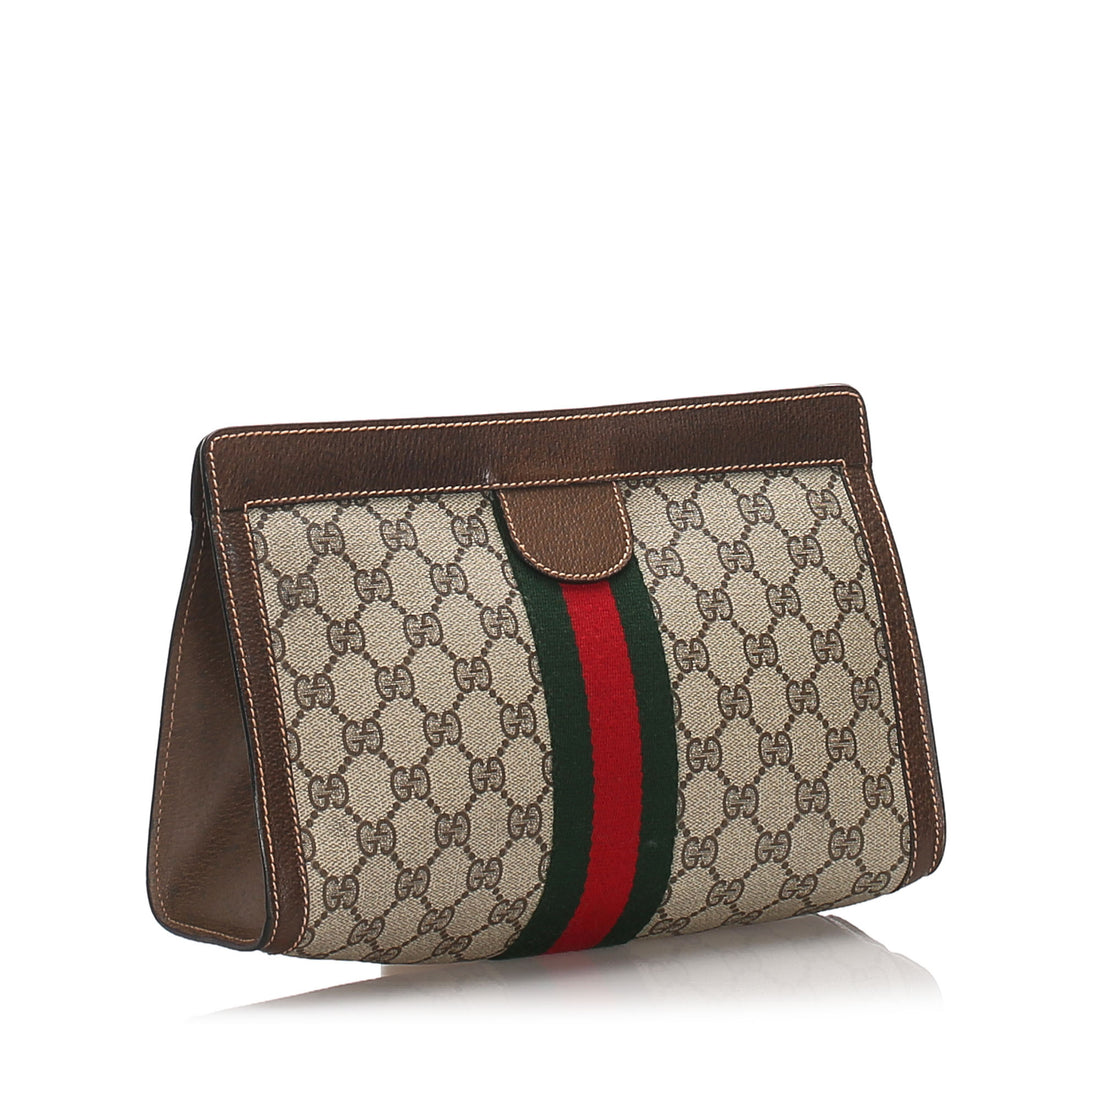 Gucci GG Supreme Clutch Bags for Women, Authenticity Guaranteed